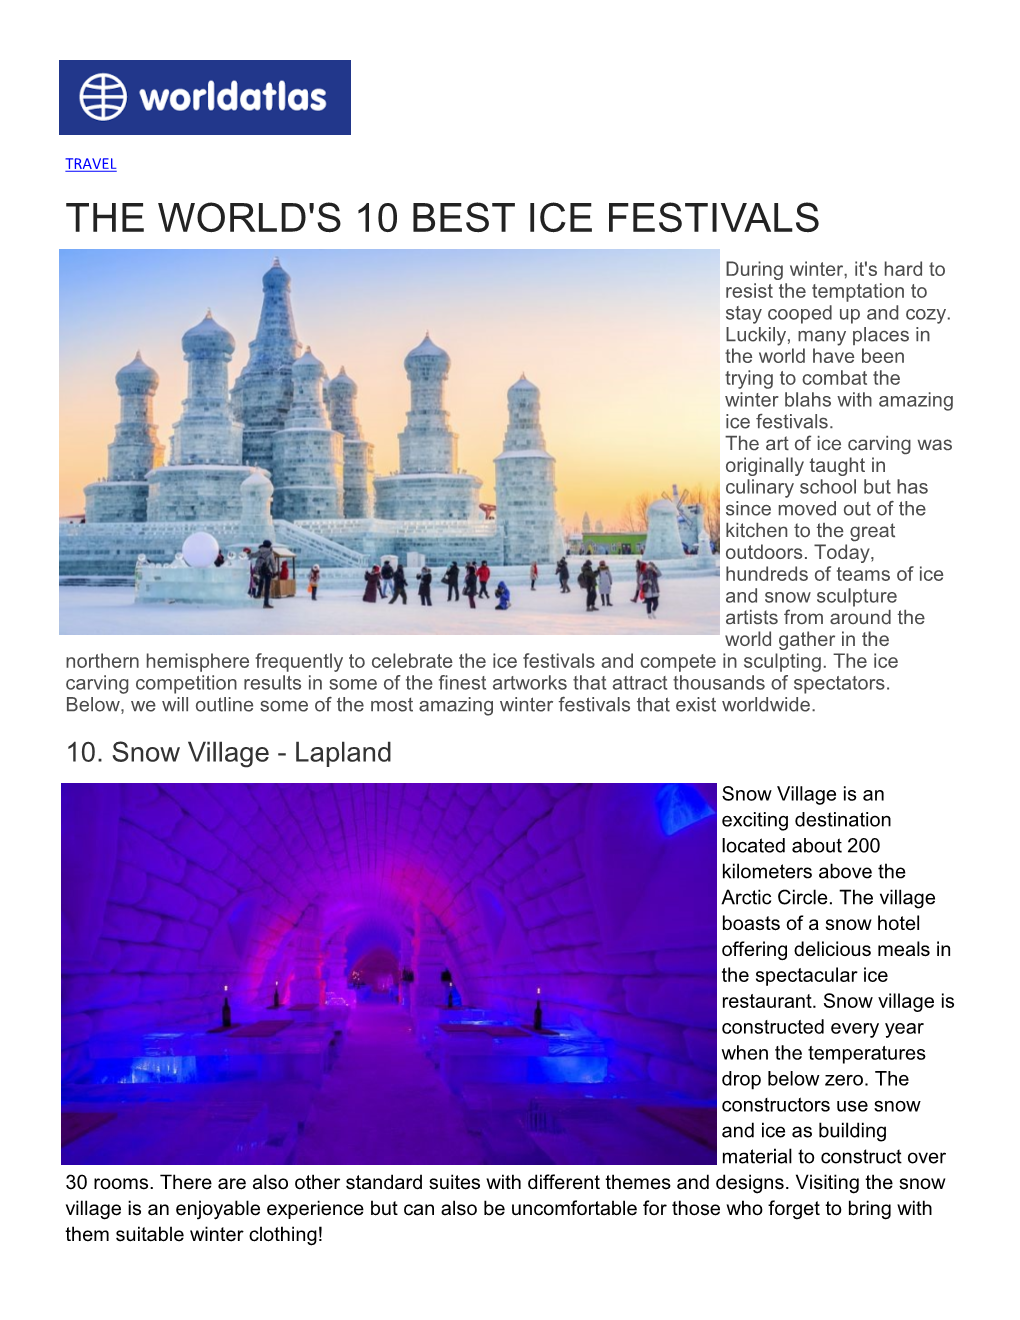 Top 10 Winter Festivals in the World